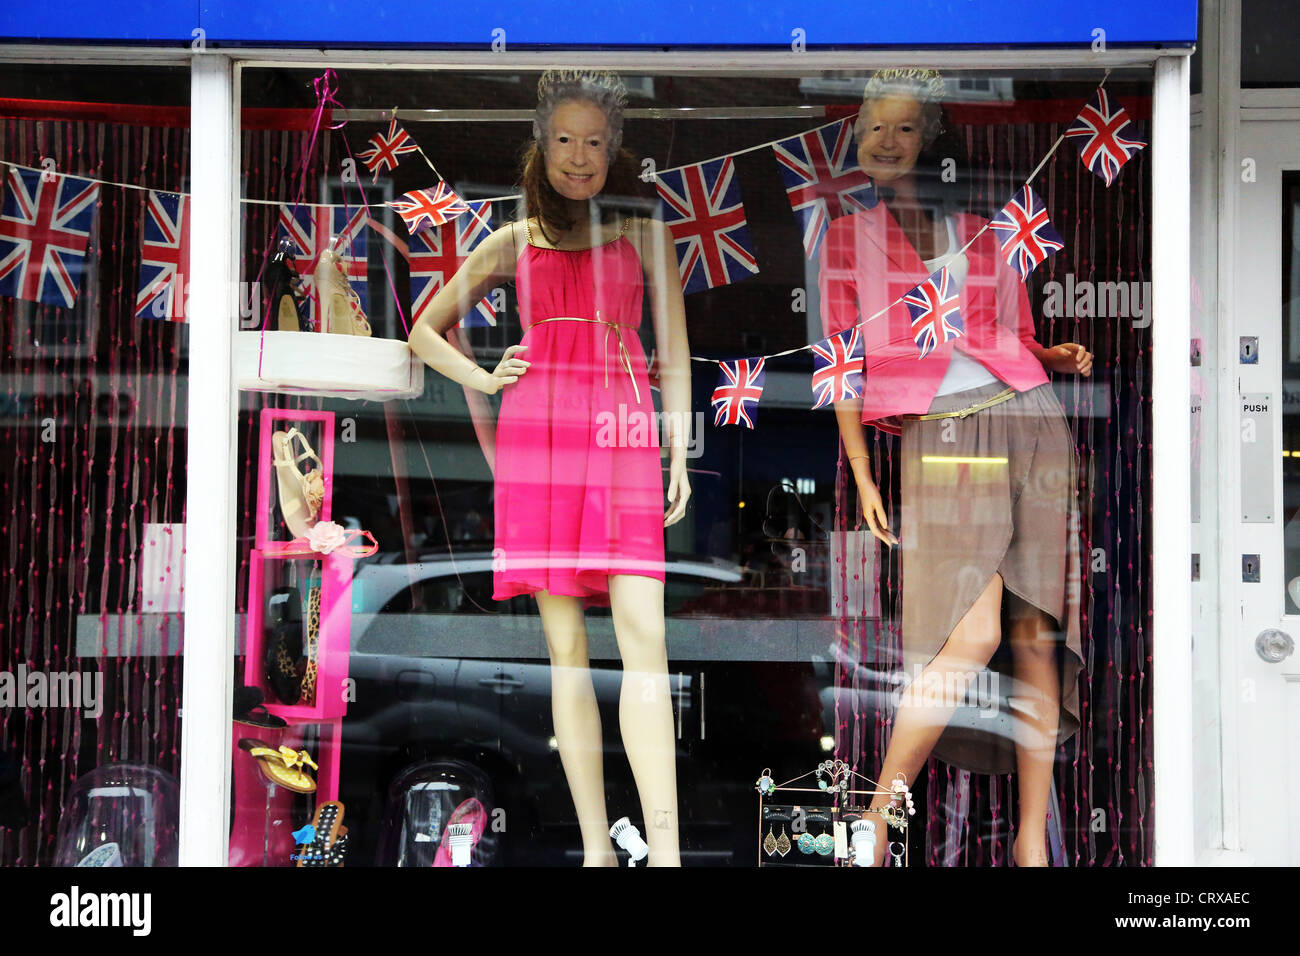 Shop Window With Union Jack Bunting And Queen Elizabeth II Face Masks On Mannequins Celebrating The Diamond Jubilee Stock Photo